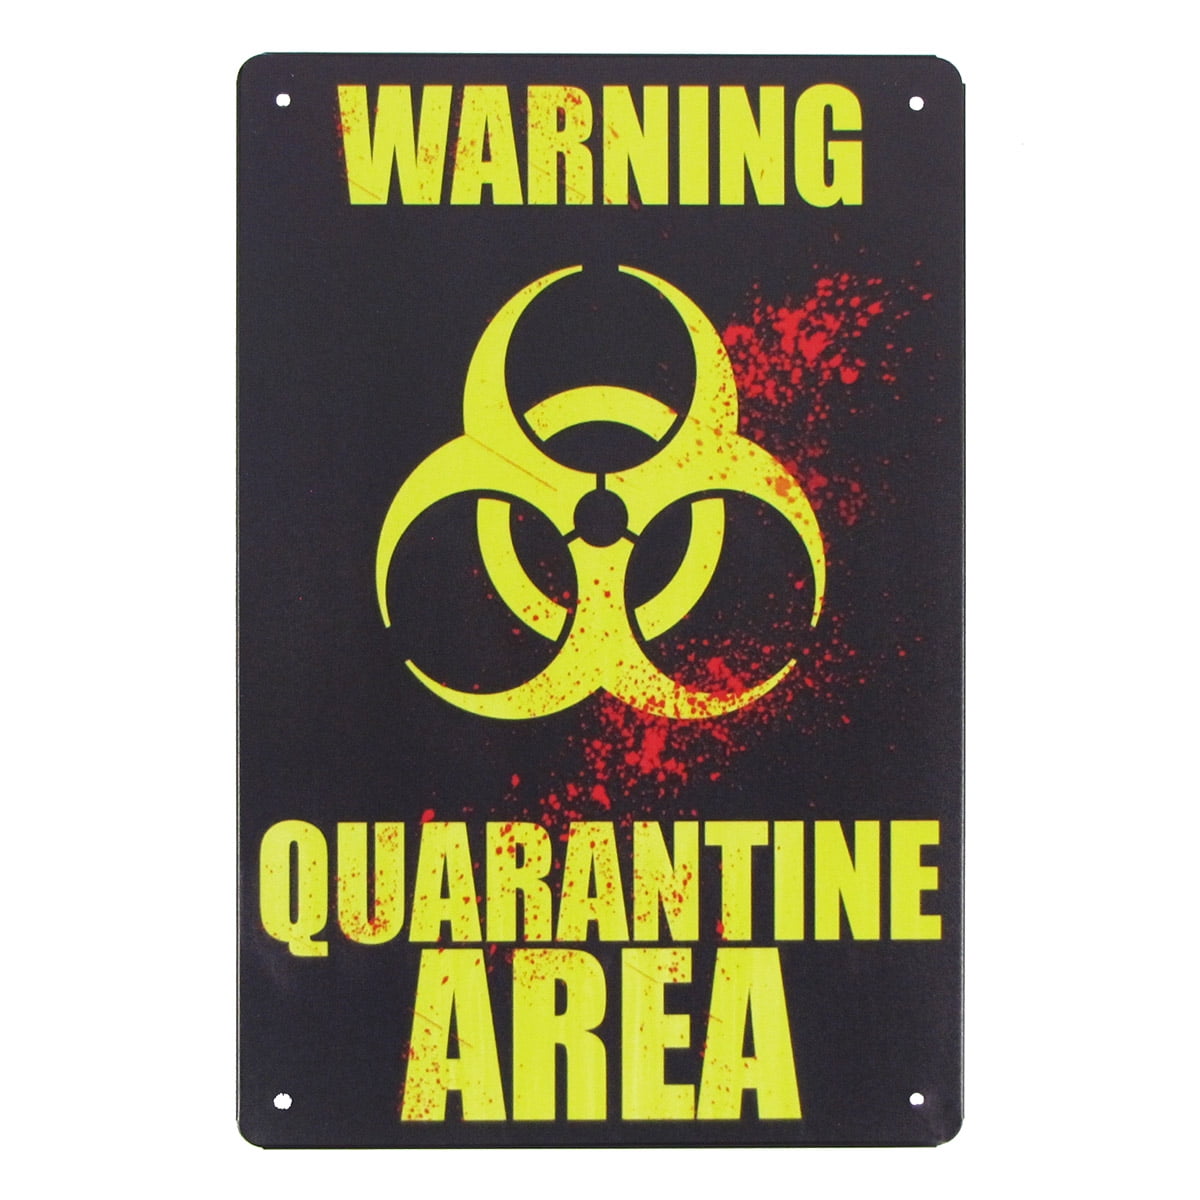 PROPERTY PROTECTED BY ZOMBIES Warning Funny Novelty Sign gift